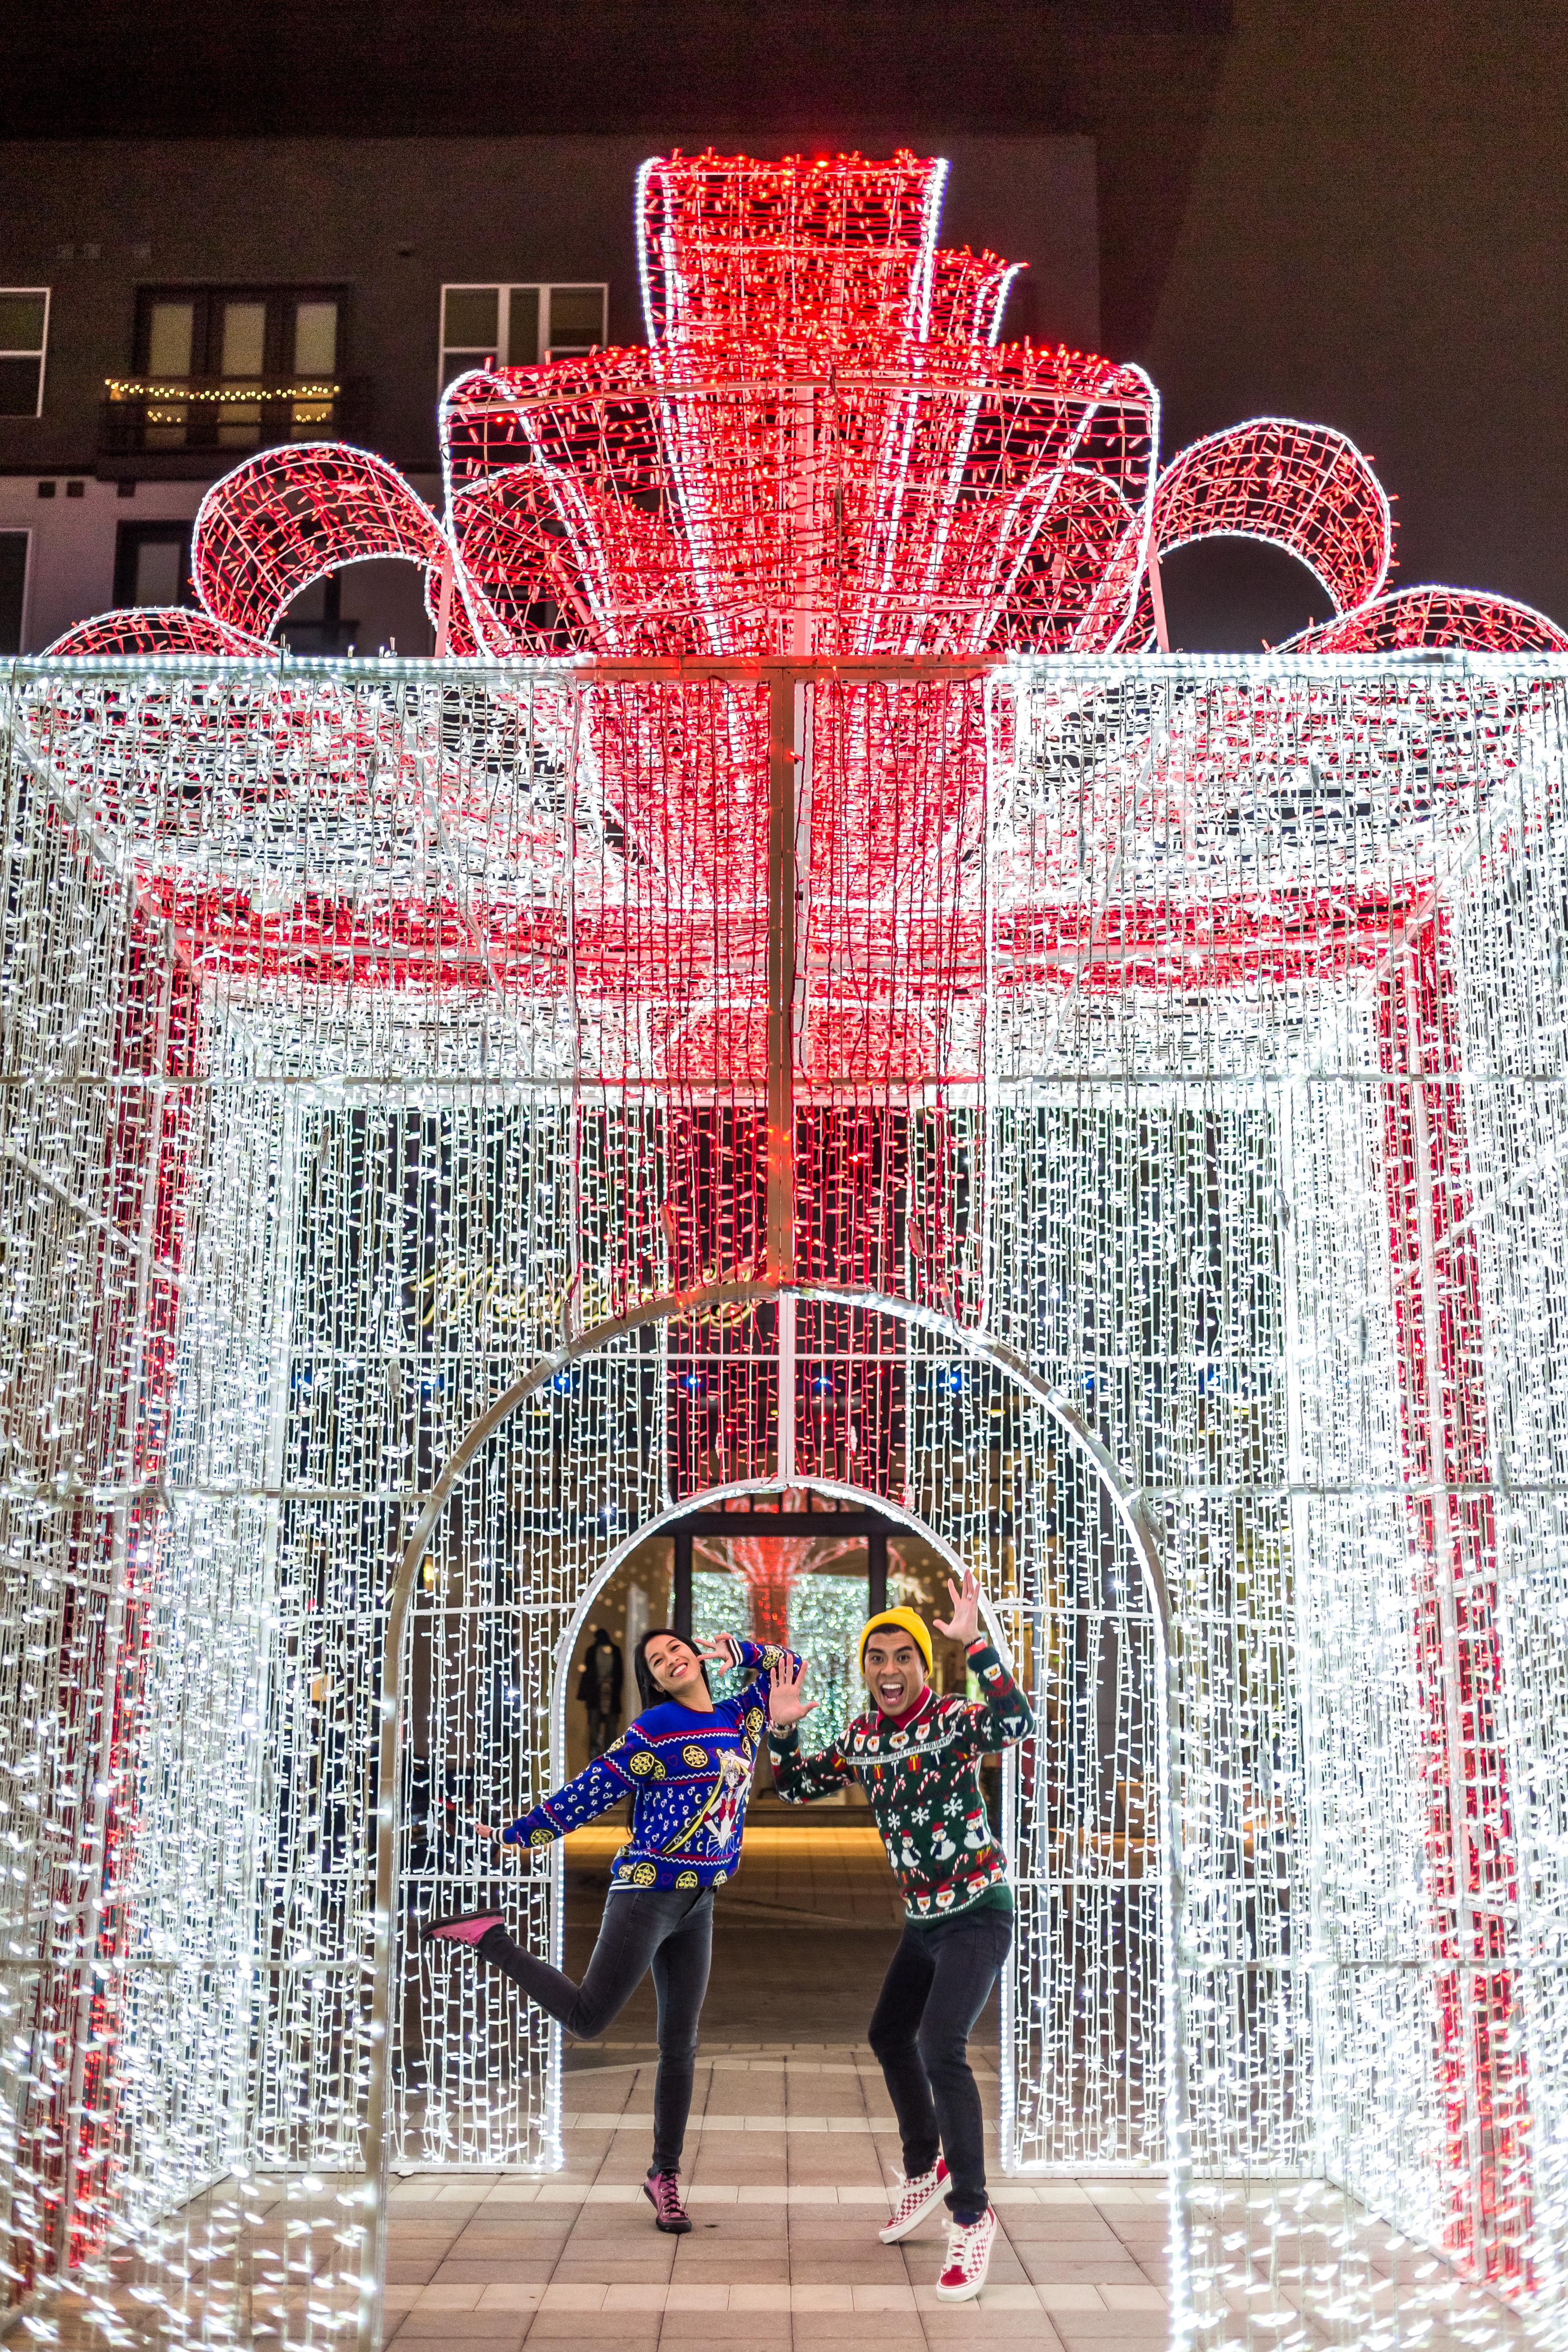 PLANO, TEXAS DAZZLES AND DELIGHTS THIS HOLIDAY SEASON